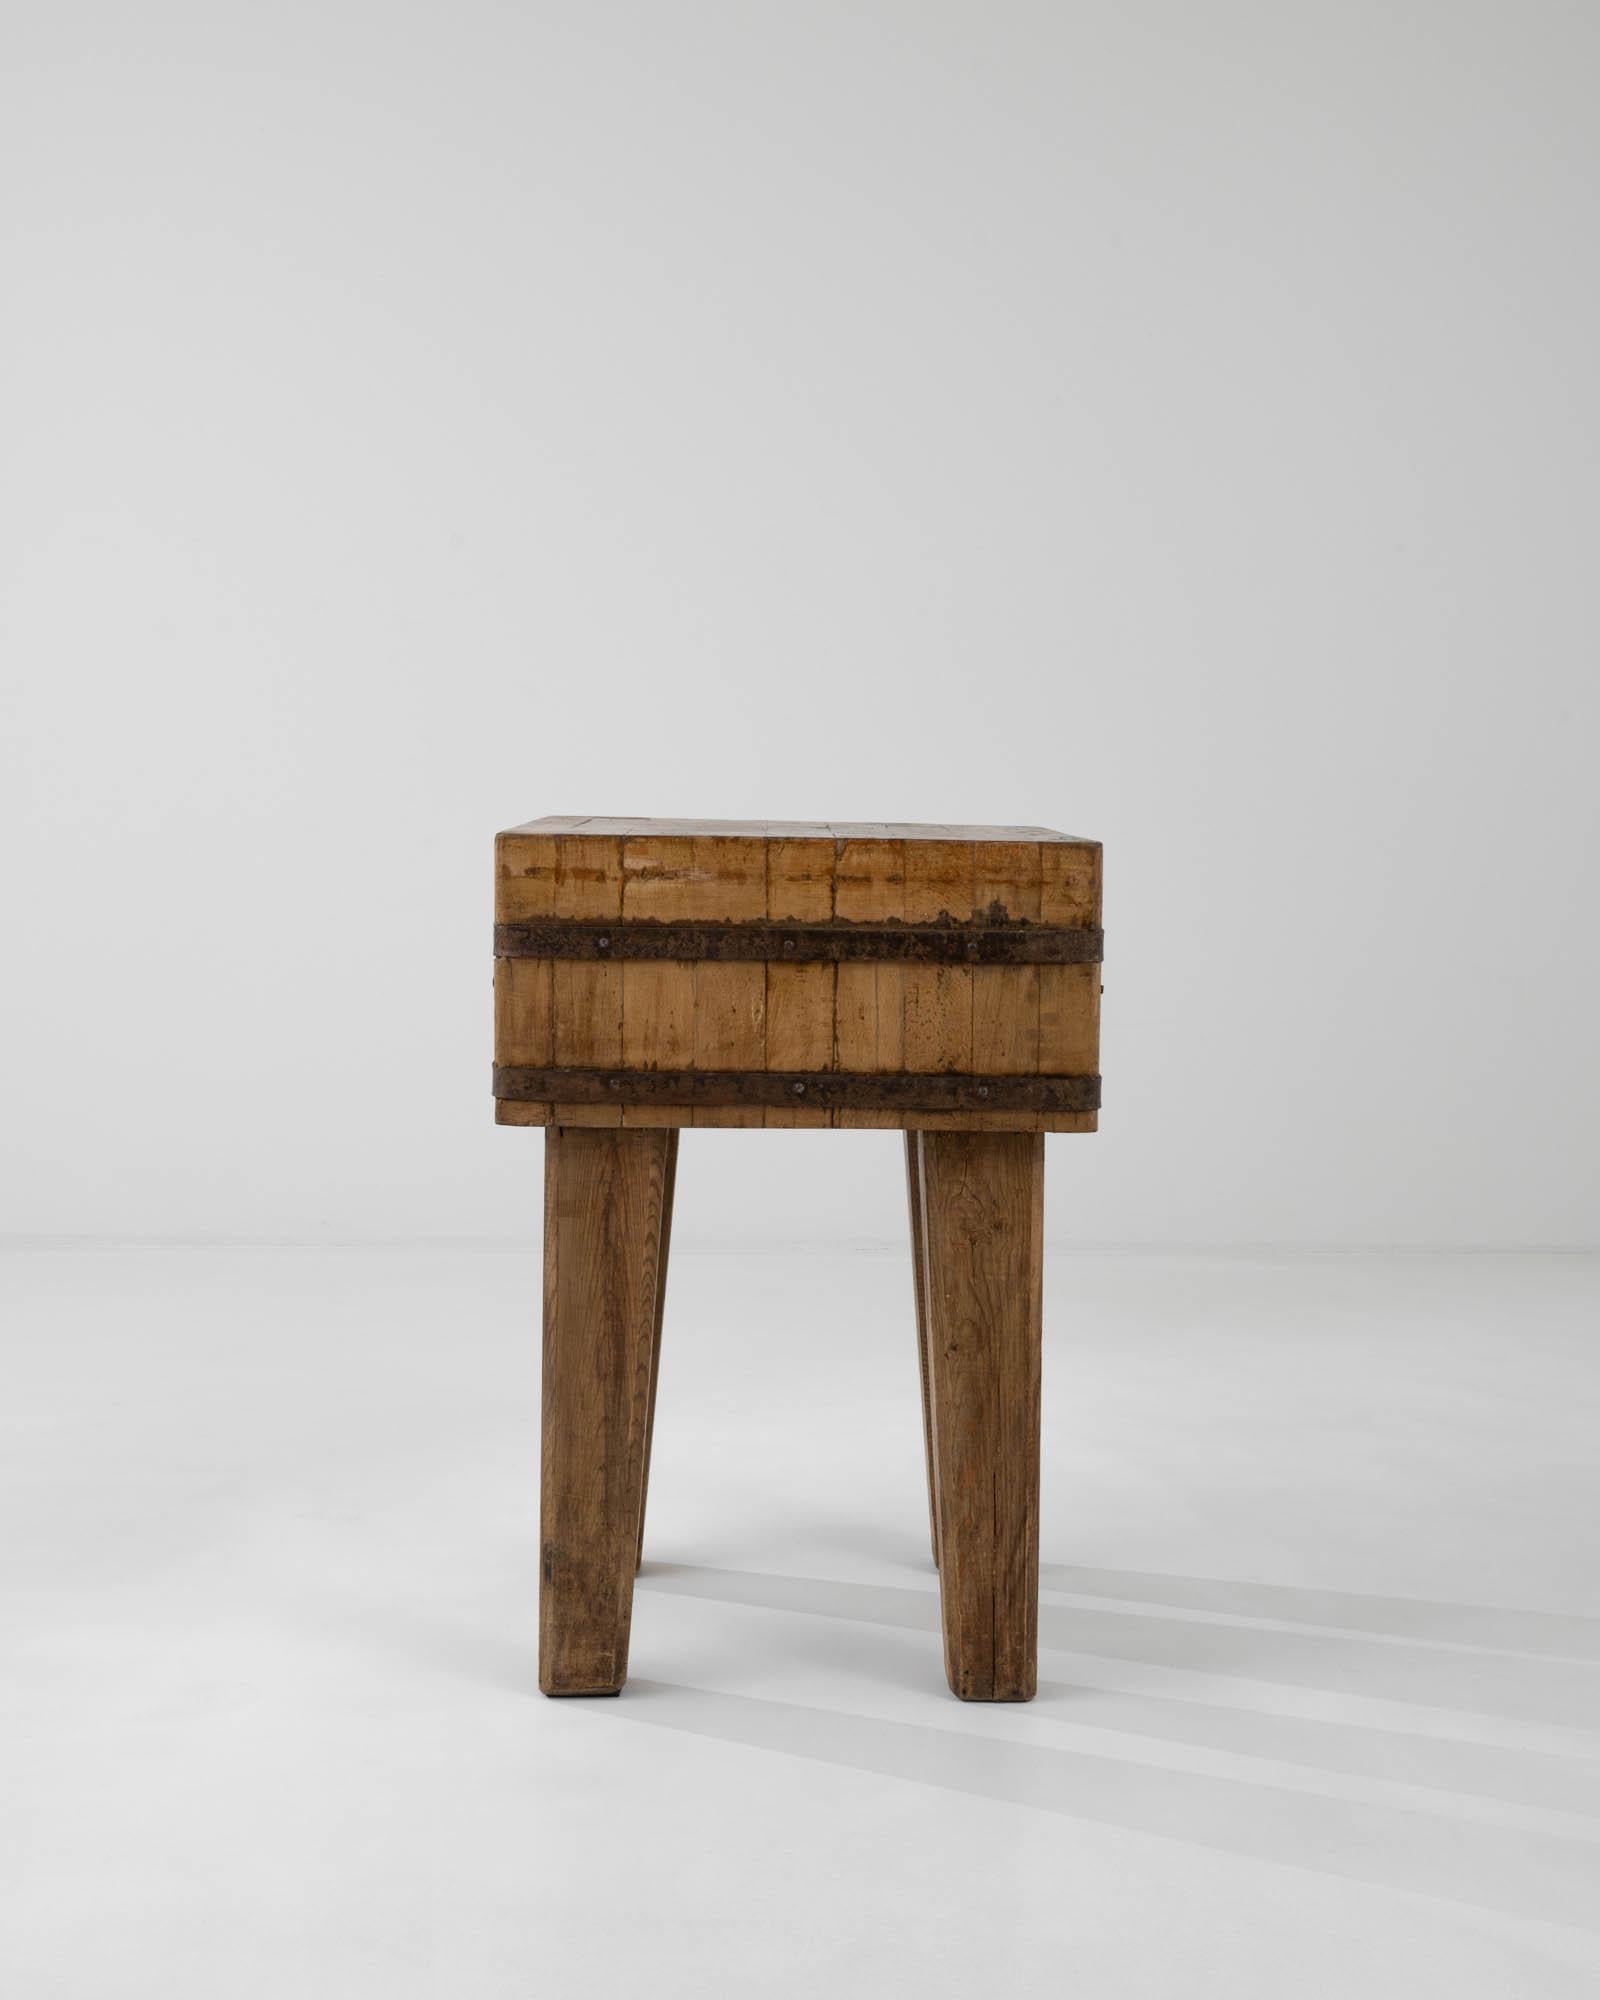 Raw wood, in combination with rustic metal elements, accentuates the brutalist spirit of this vintage work table, made in Central Europe. The thick top is formed from block of laminated hardwood pieces faced with the engrian upwards, a design